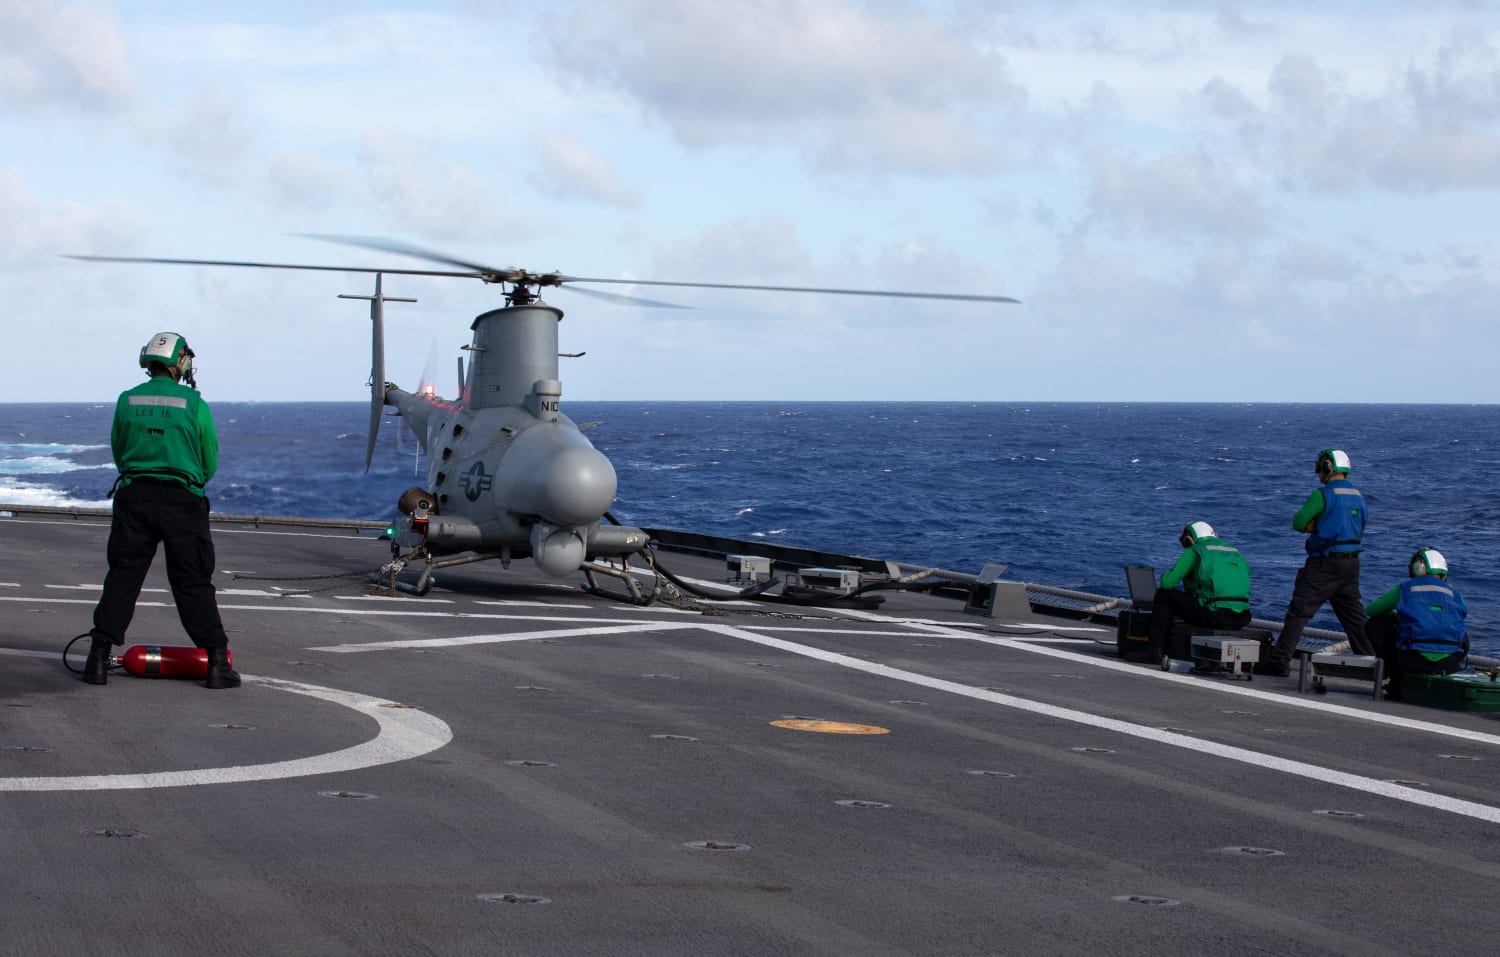 Why no Official US Navy Imagery such as this for UAP's - USS Tulsa conducts MQ-8B operations in the Philippine Sea?